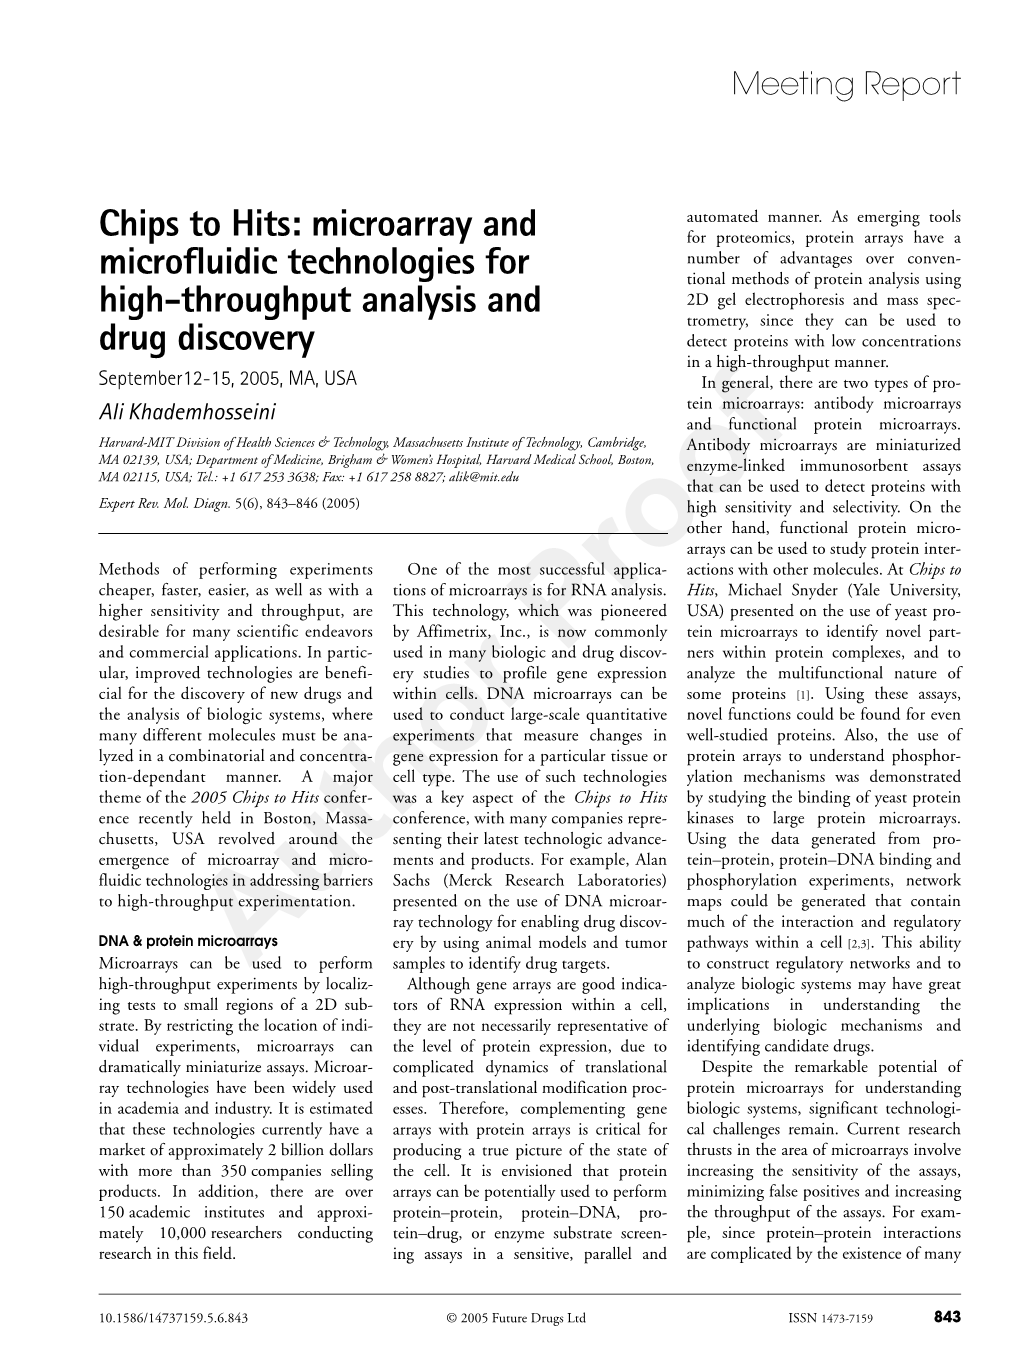 Chips to Hits: Microarray and Microfluidic Technologies for High-Throughput Analysis and Drug Discovery